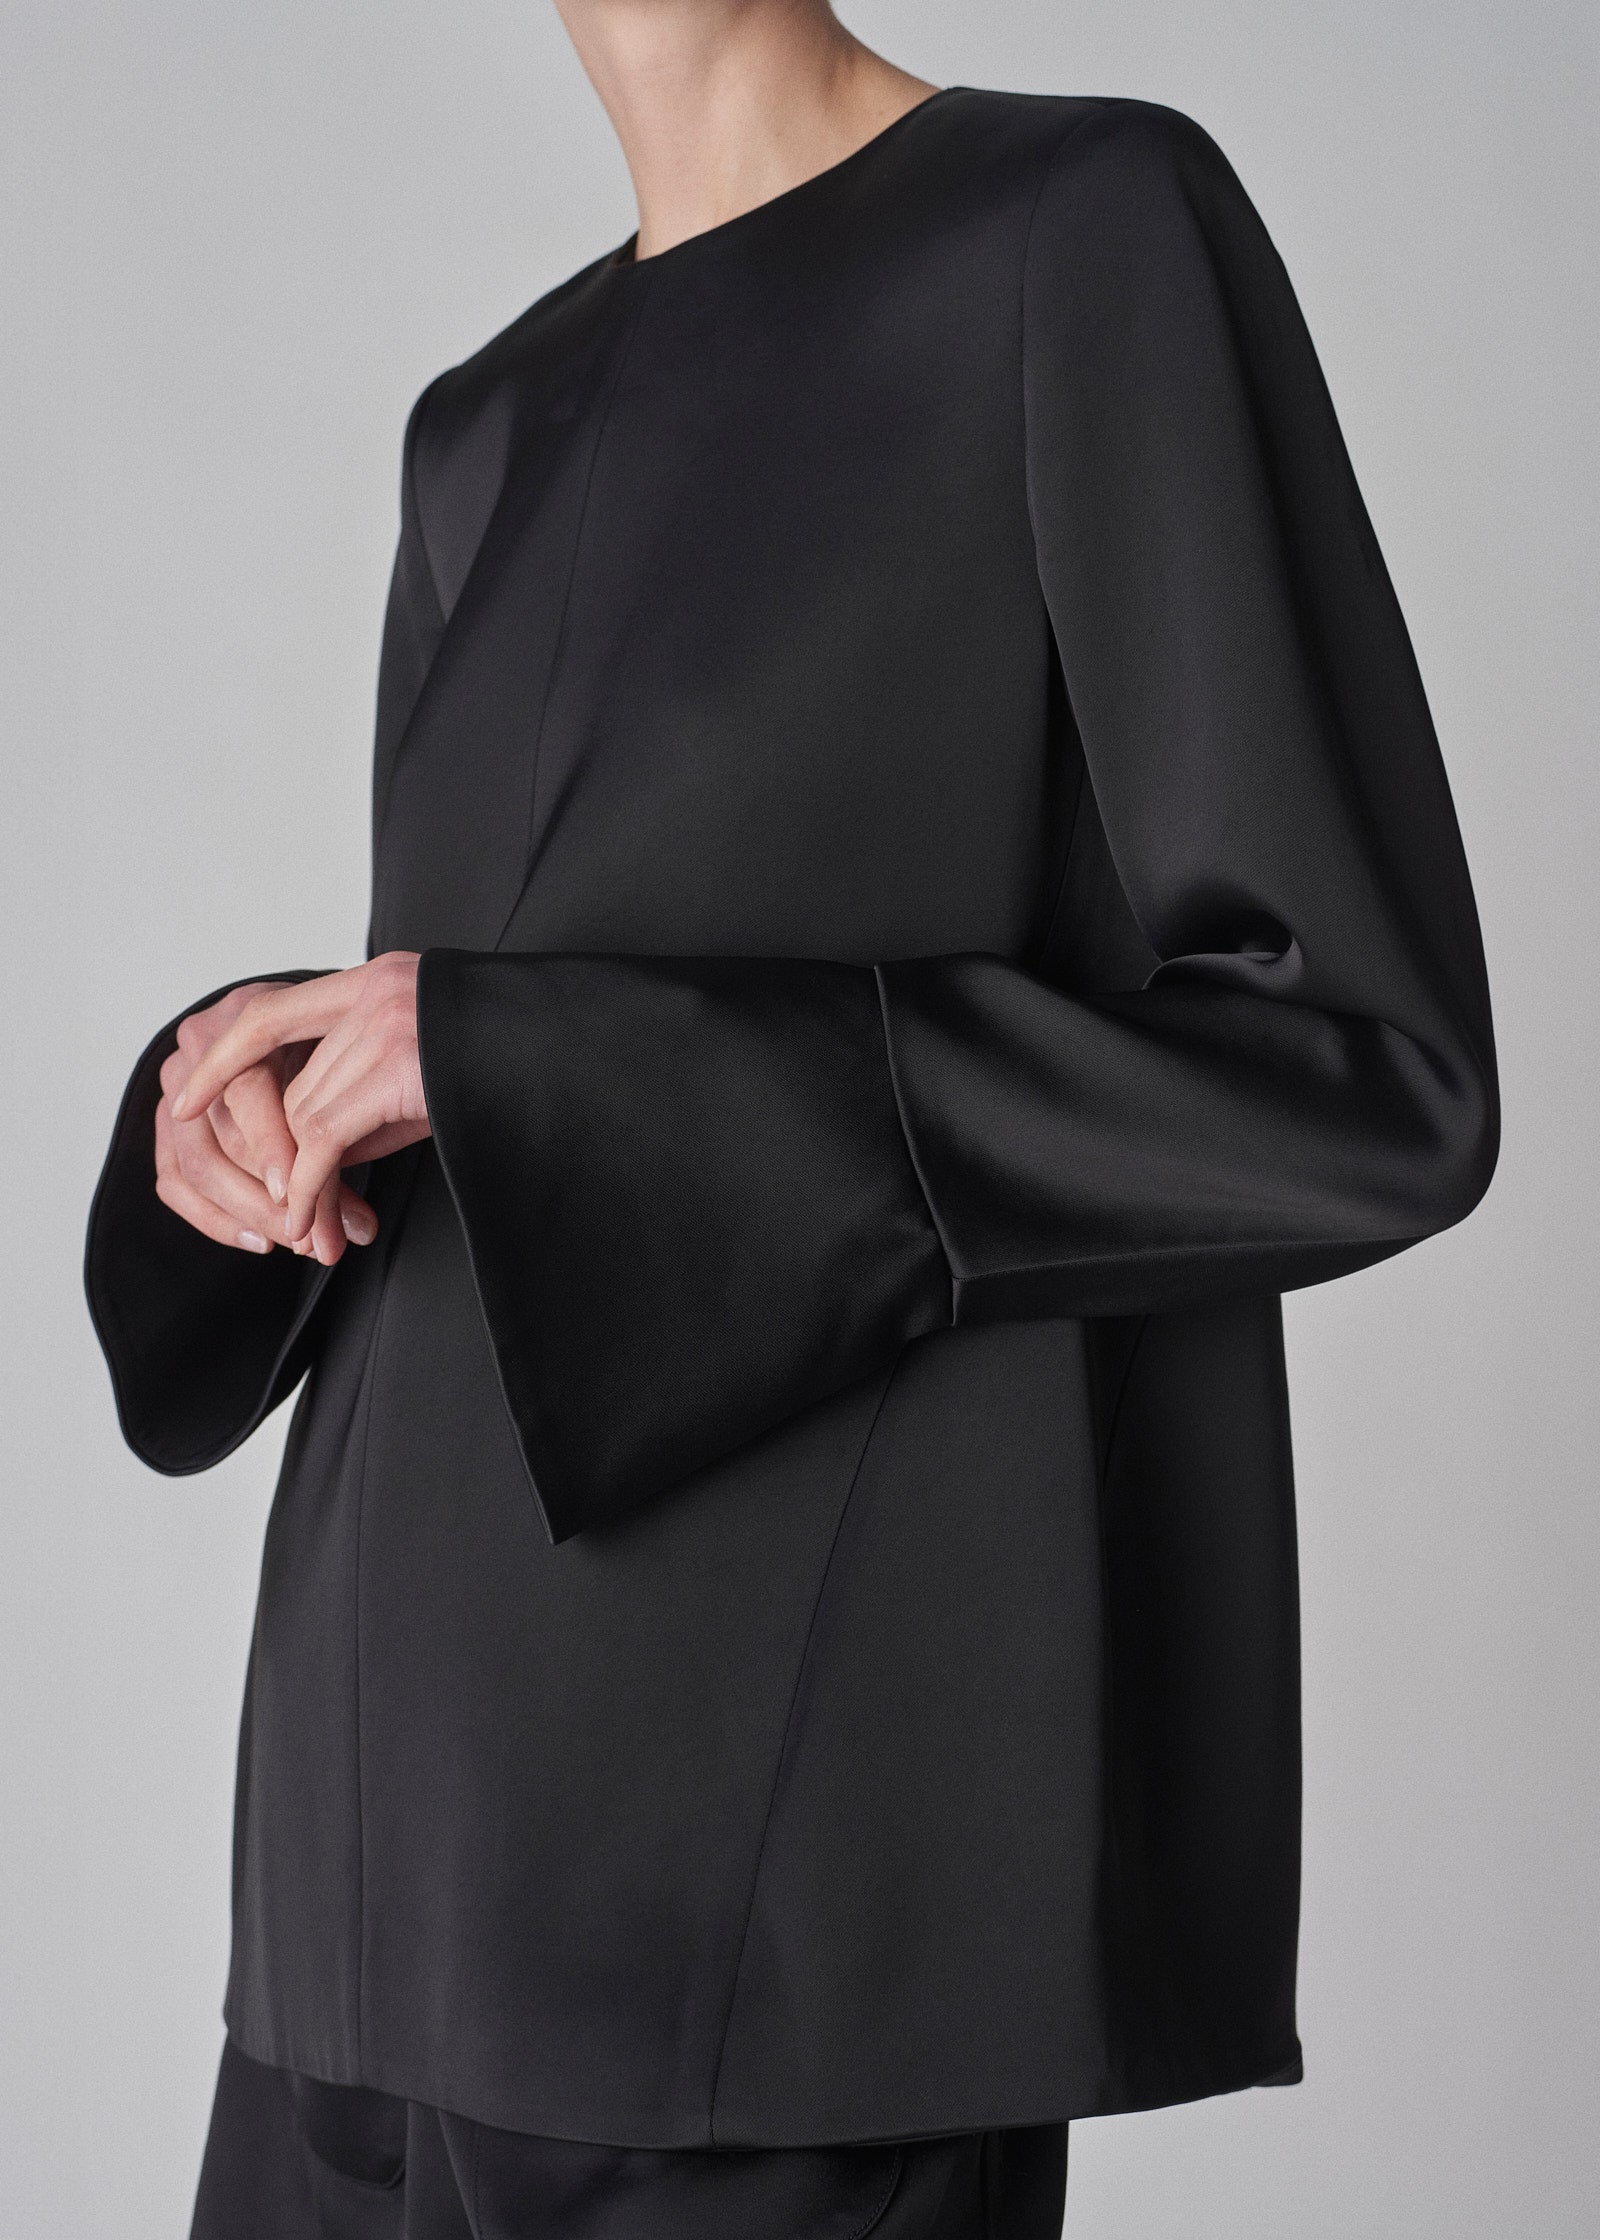 Peplum Sleeve Top in Satin Crepe - Black - CO Collections